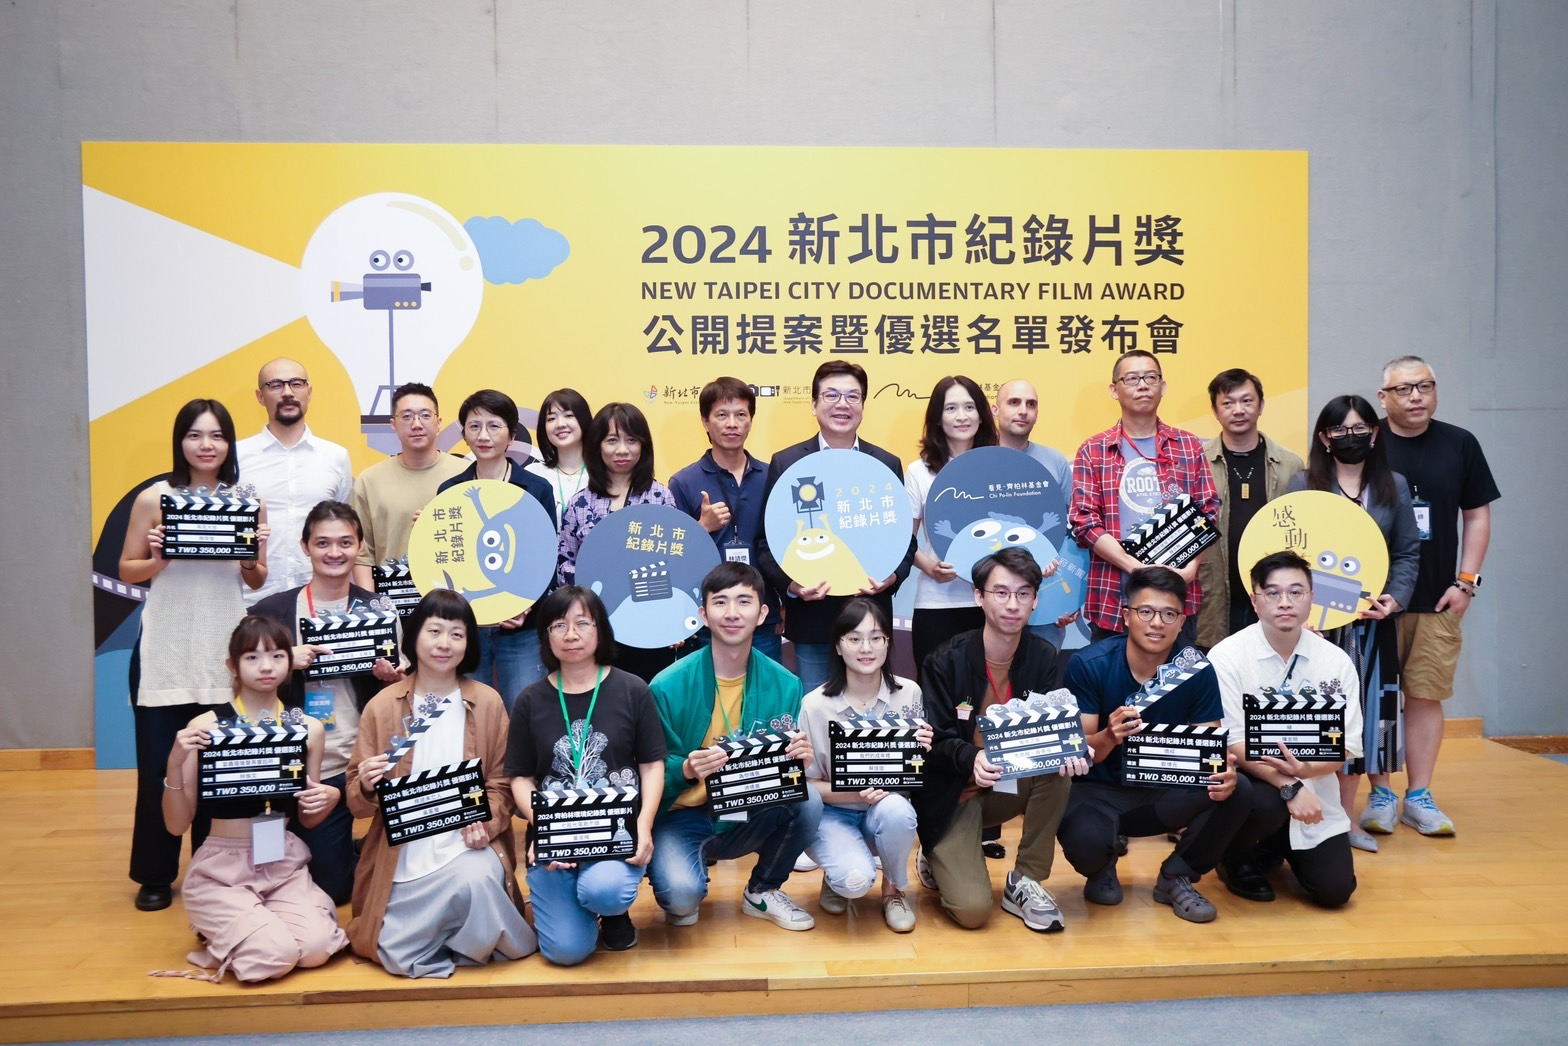 Congratulations to our departmental colleague for being nominated and winning at the 2024 New Taipei City Documentary Film Award!